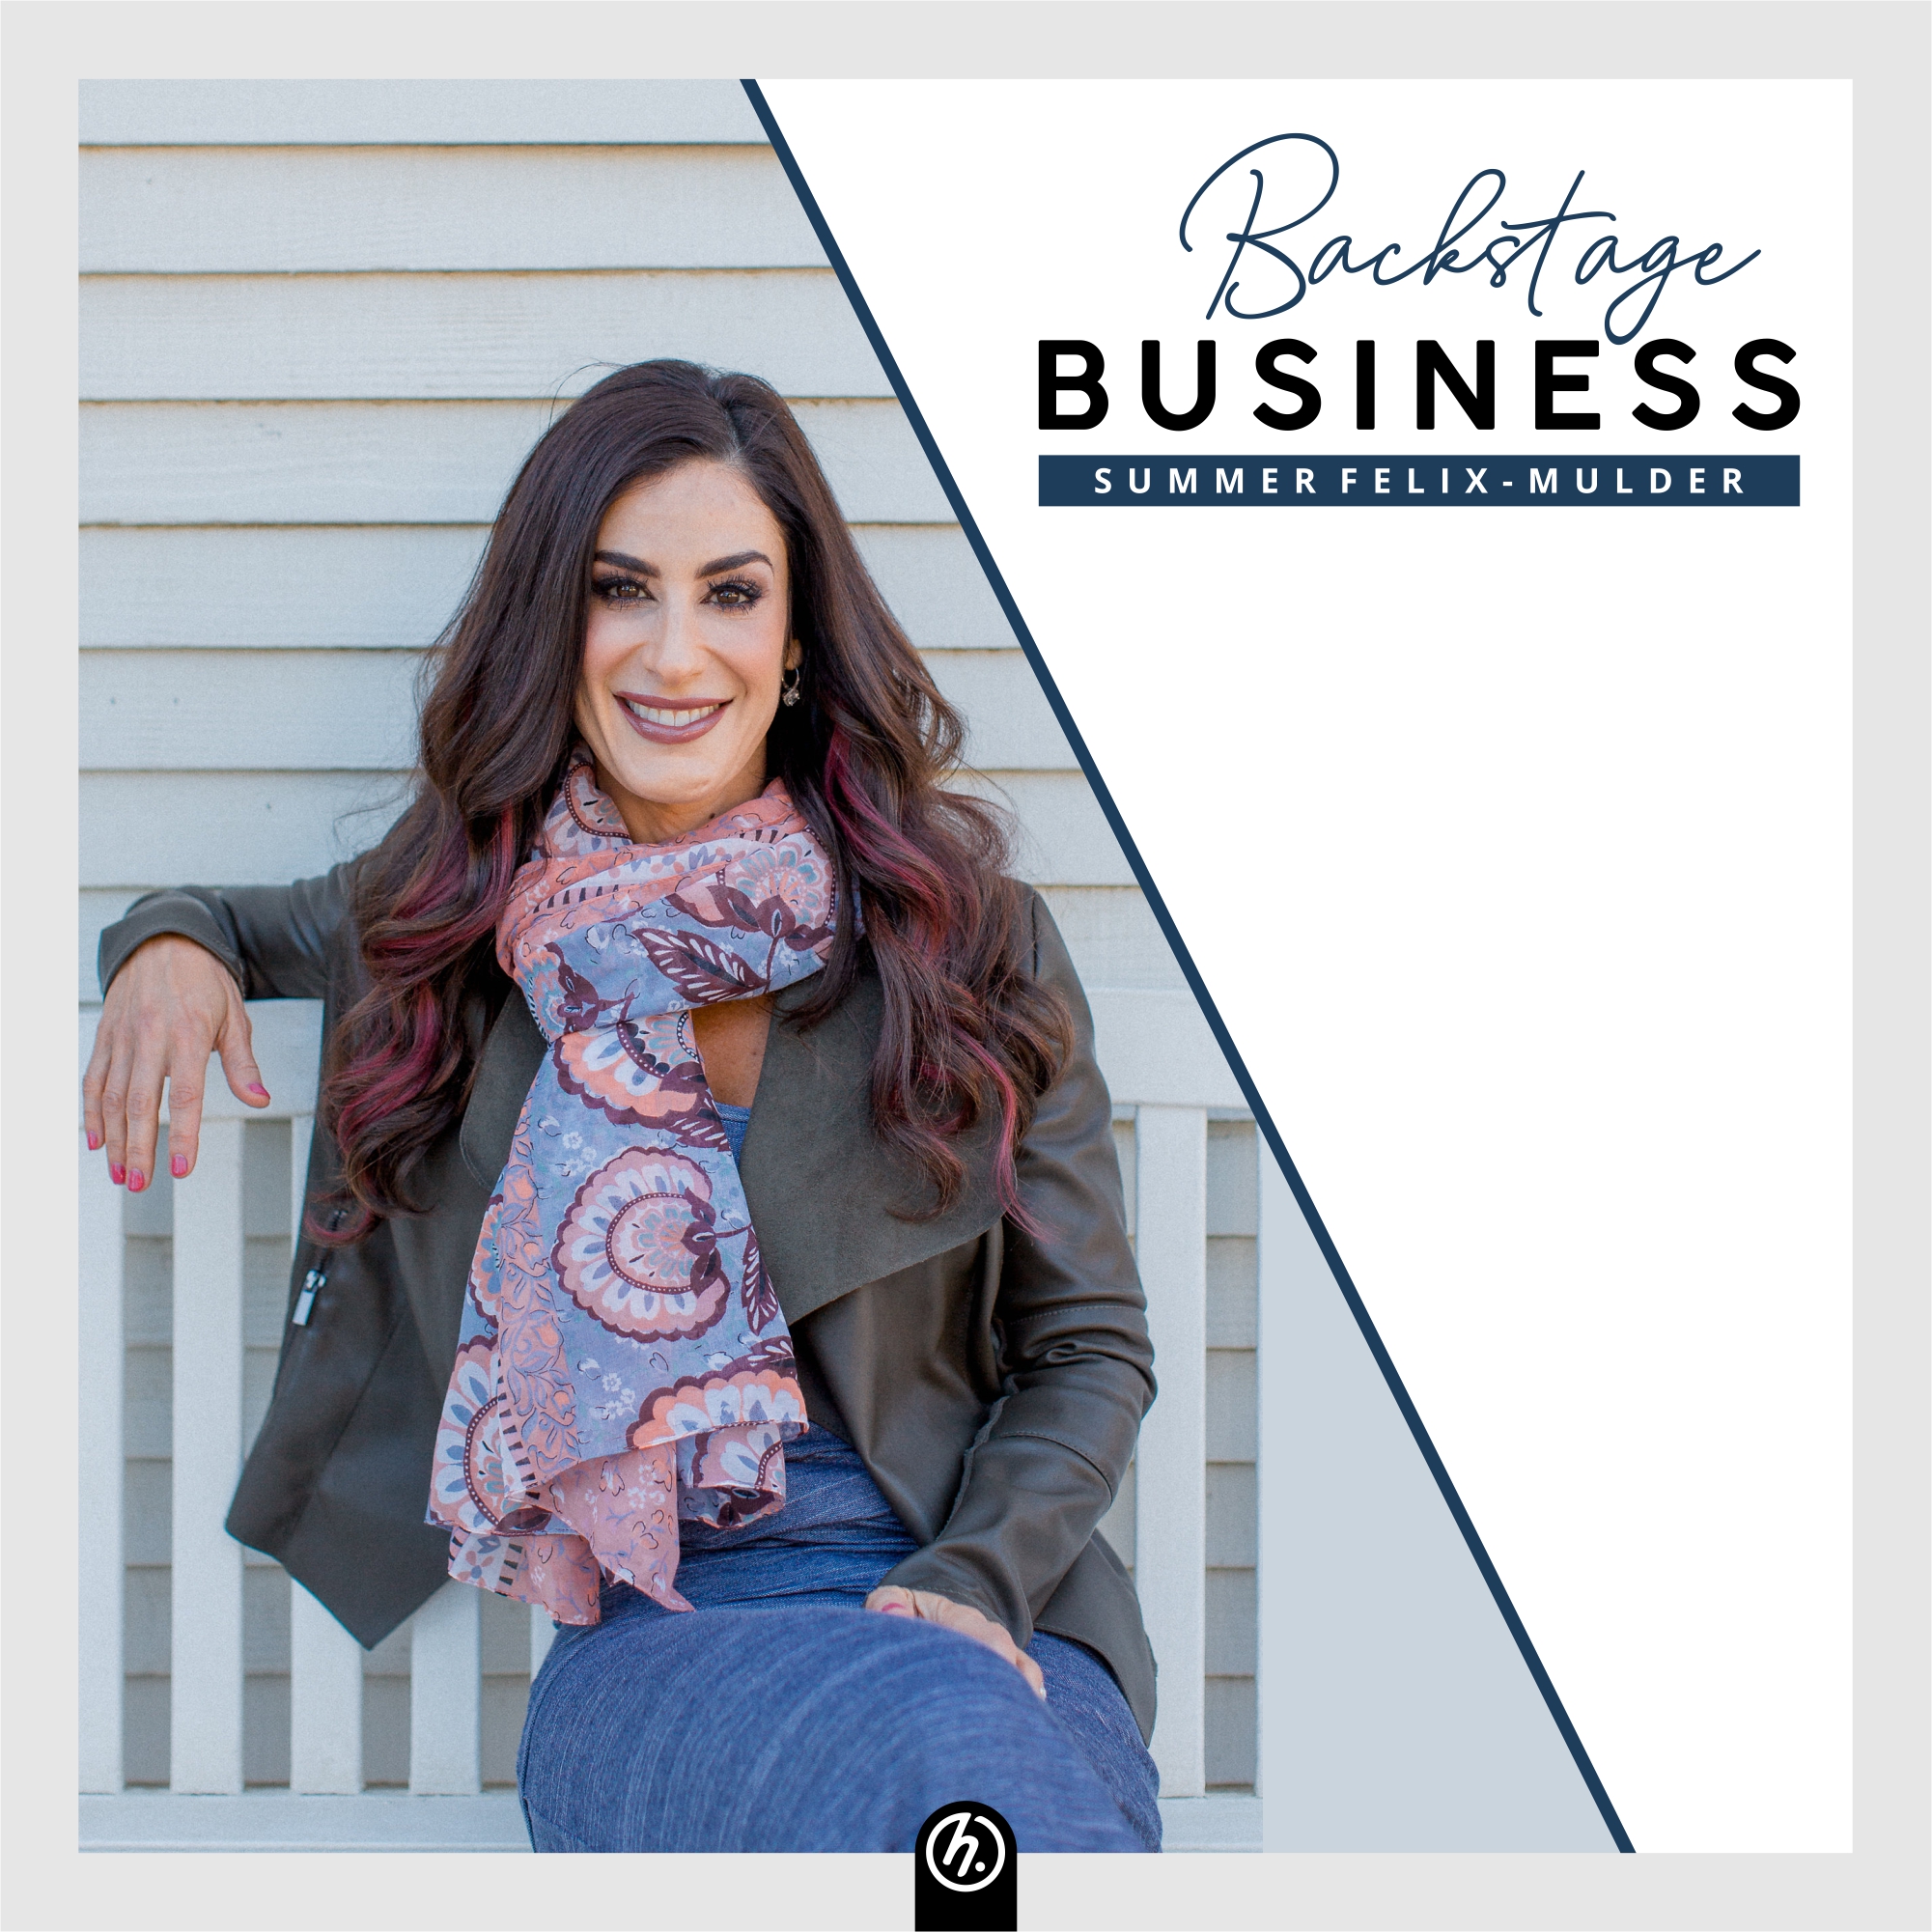 Publishing: How to Write, Design, and Market Your Book with Michelle Vandepas - Backstage Business #39